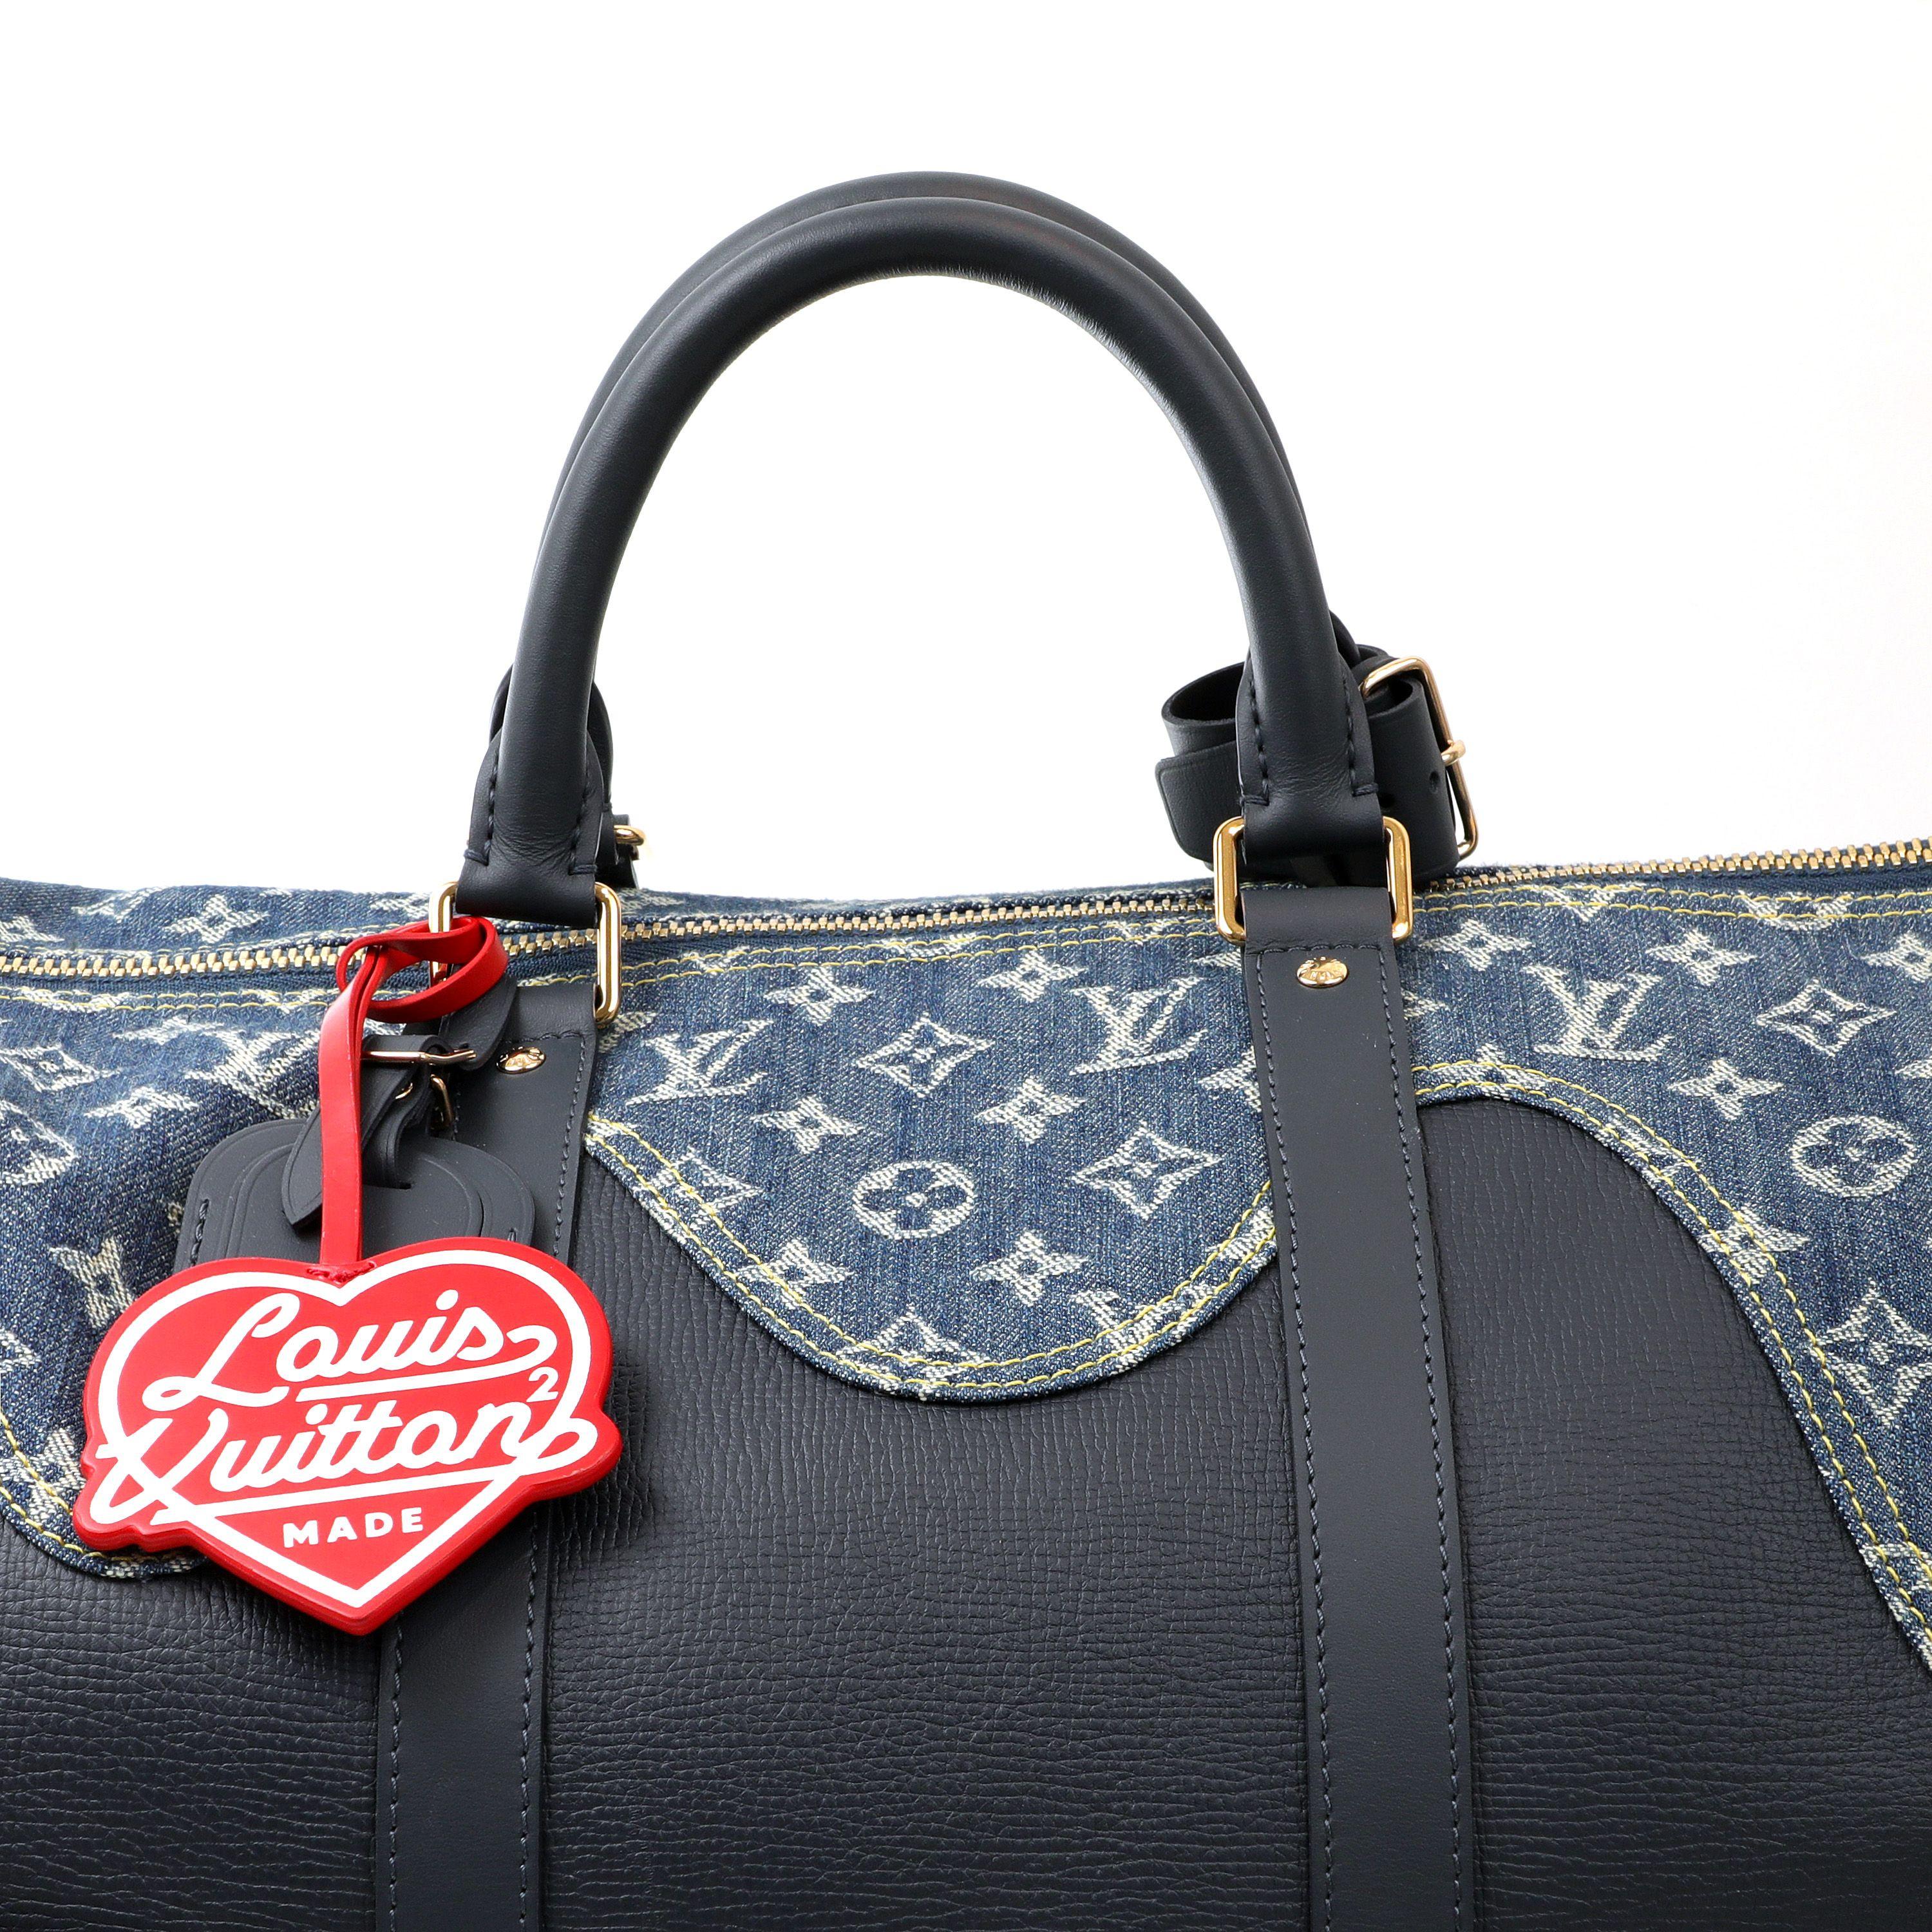 This authentic Louis Vuitton Navy Leather and Denim Monogram Drip Keepall 60 is in pristine condition.  From the Virgil Abloh Collection, this is the largest size of the Bandouliere Keepall.  Navy blue grained leather with LV monogram denim